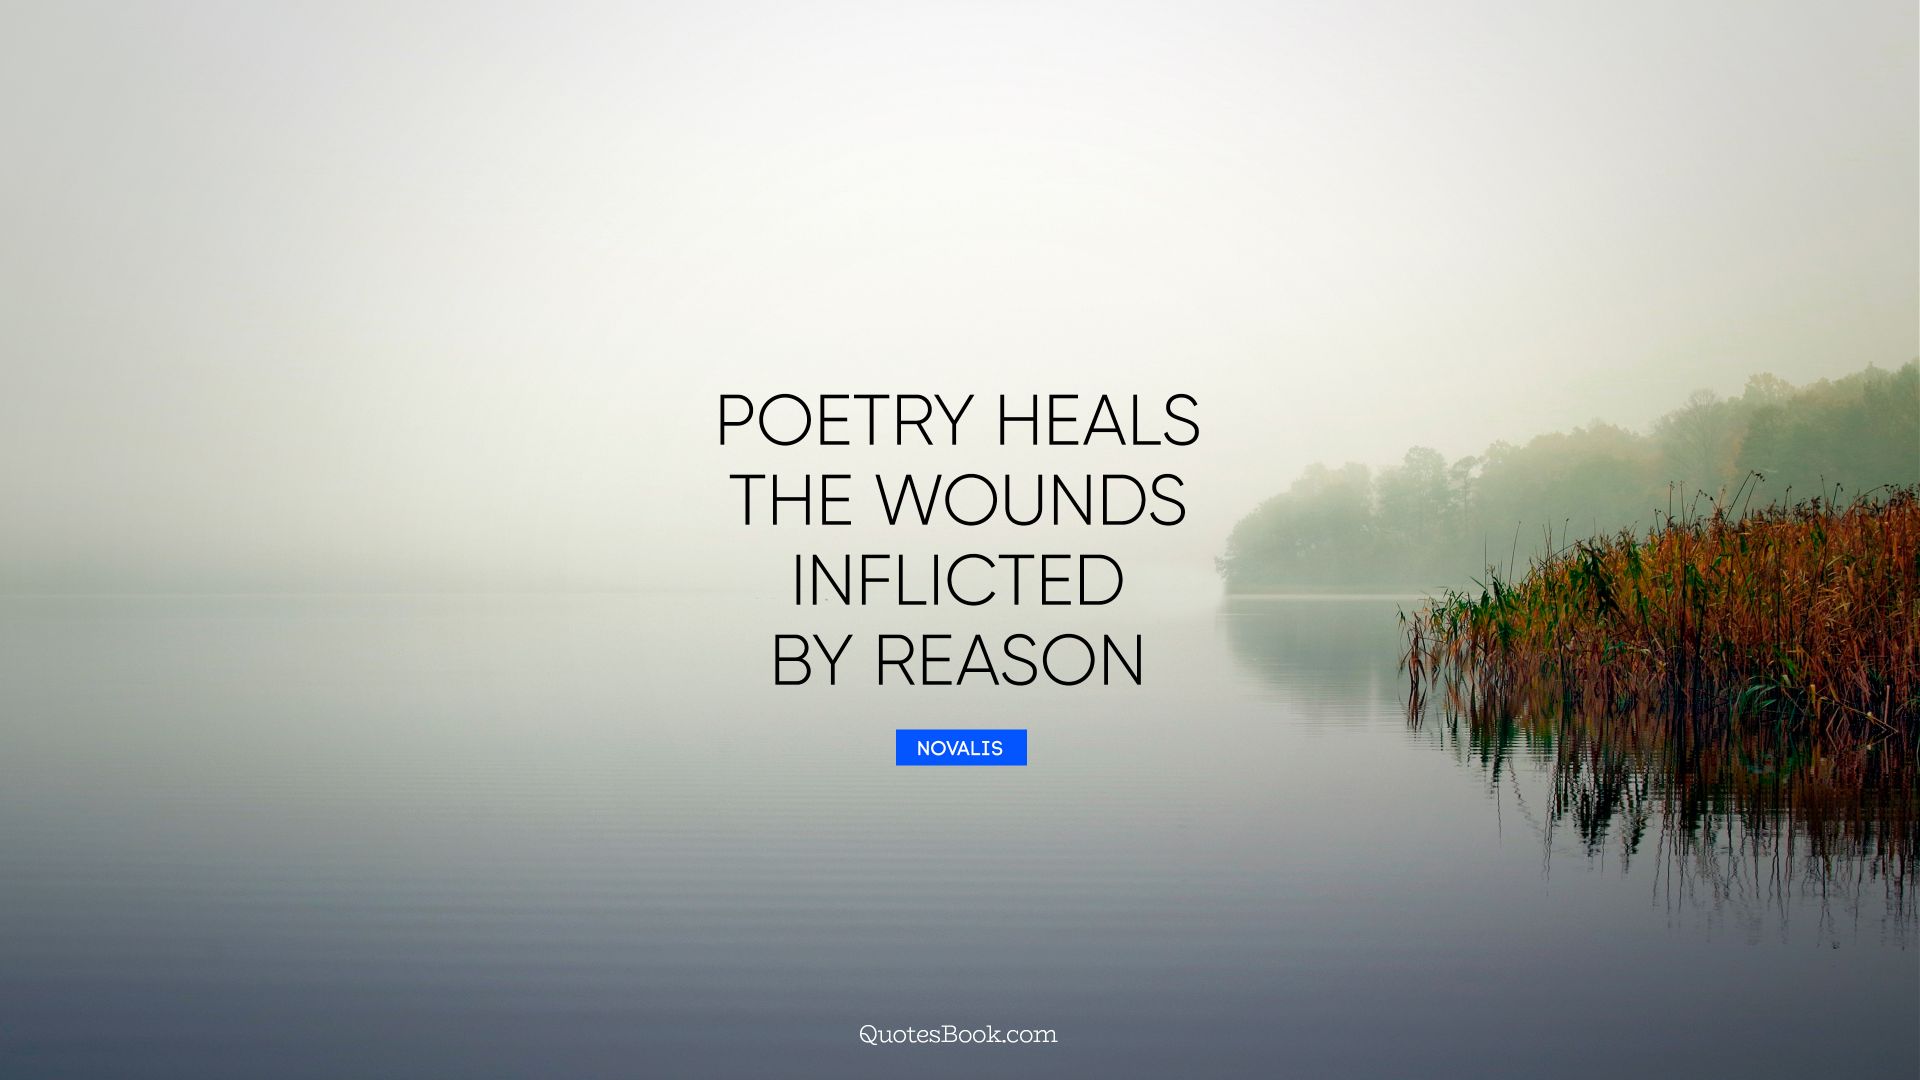 Poetry heals the wounds inflicted by reason. - Quote by Novalis